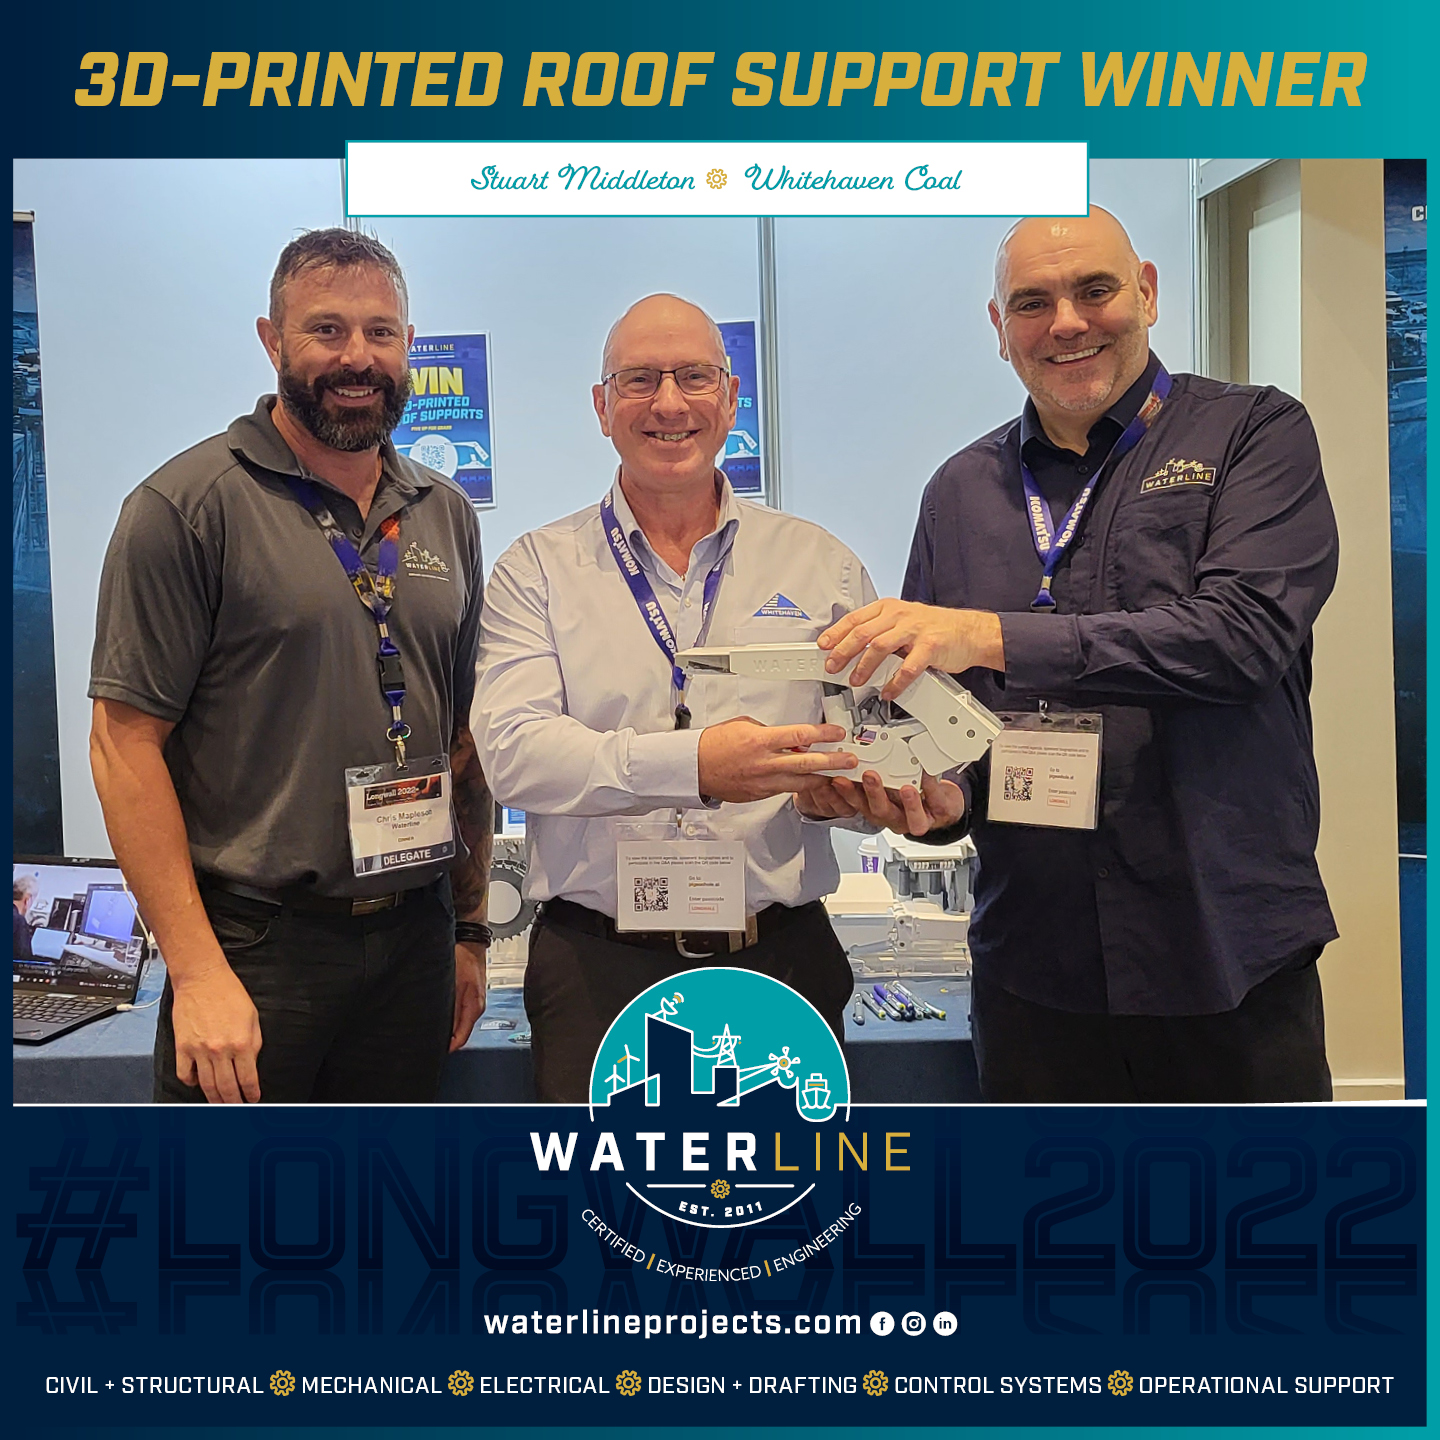 Waterline's Chris Mapleson (L) with Stuart Middleton from Whitehaven Coal, winner of one of our 3D-printed roof supports, and me (Dan Harrison - R)